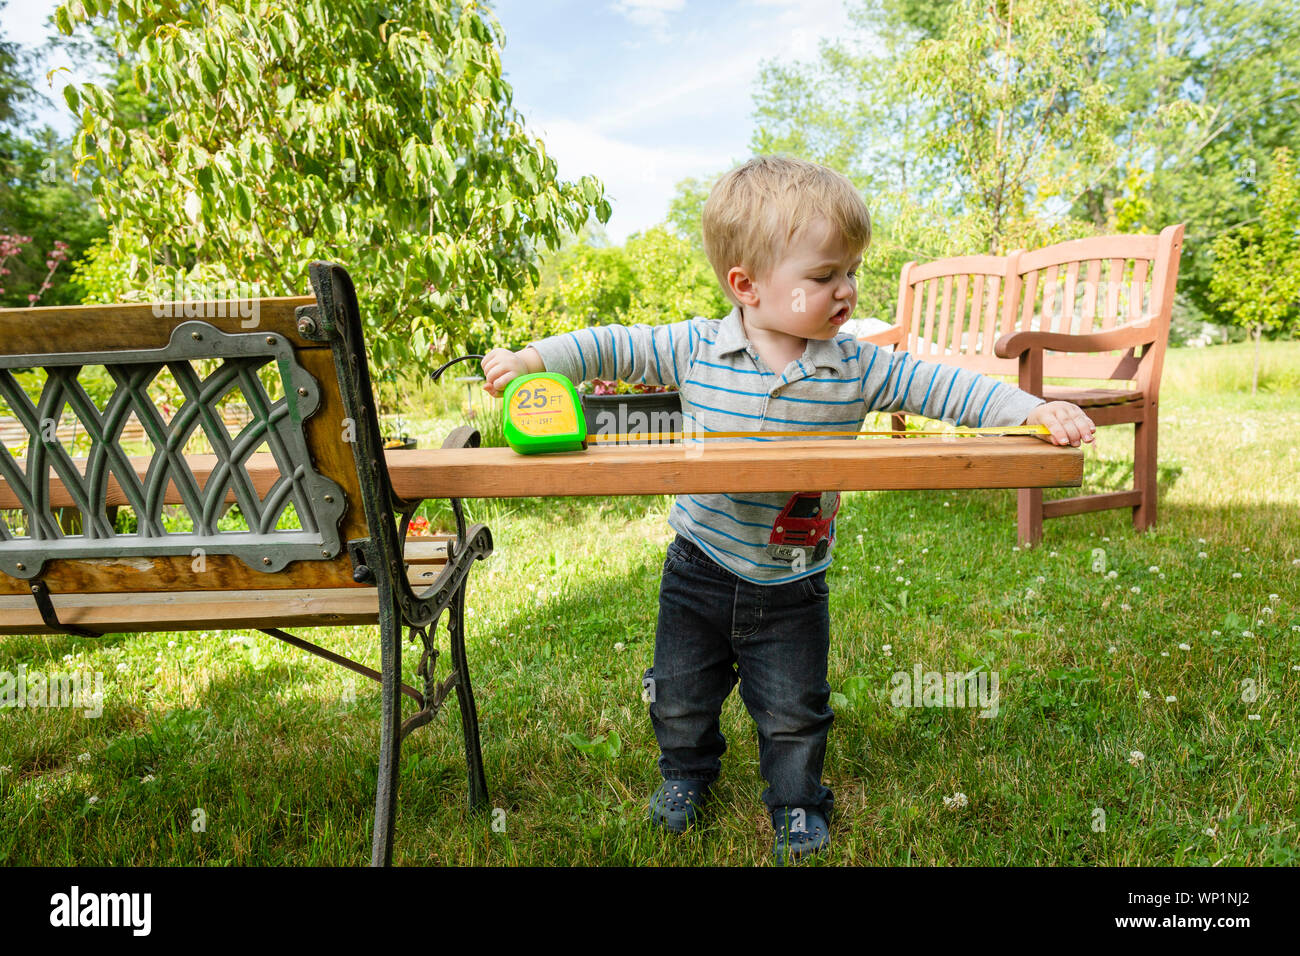 Toddler boy looks serious as he measures a board outside in backyard Stock Photo